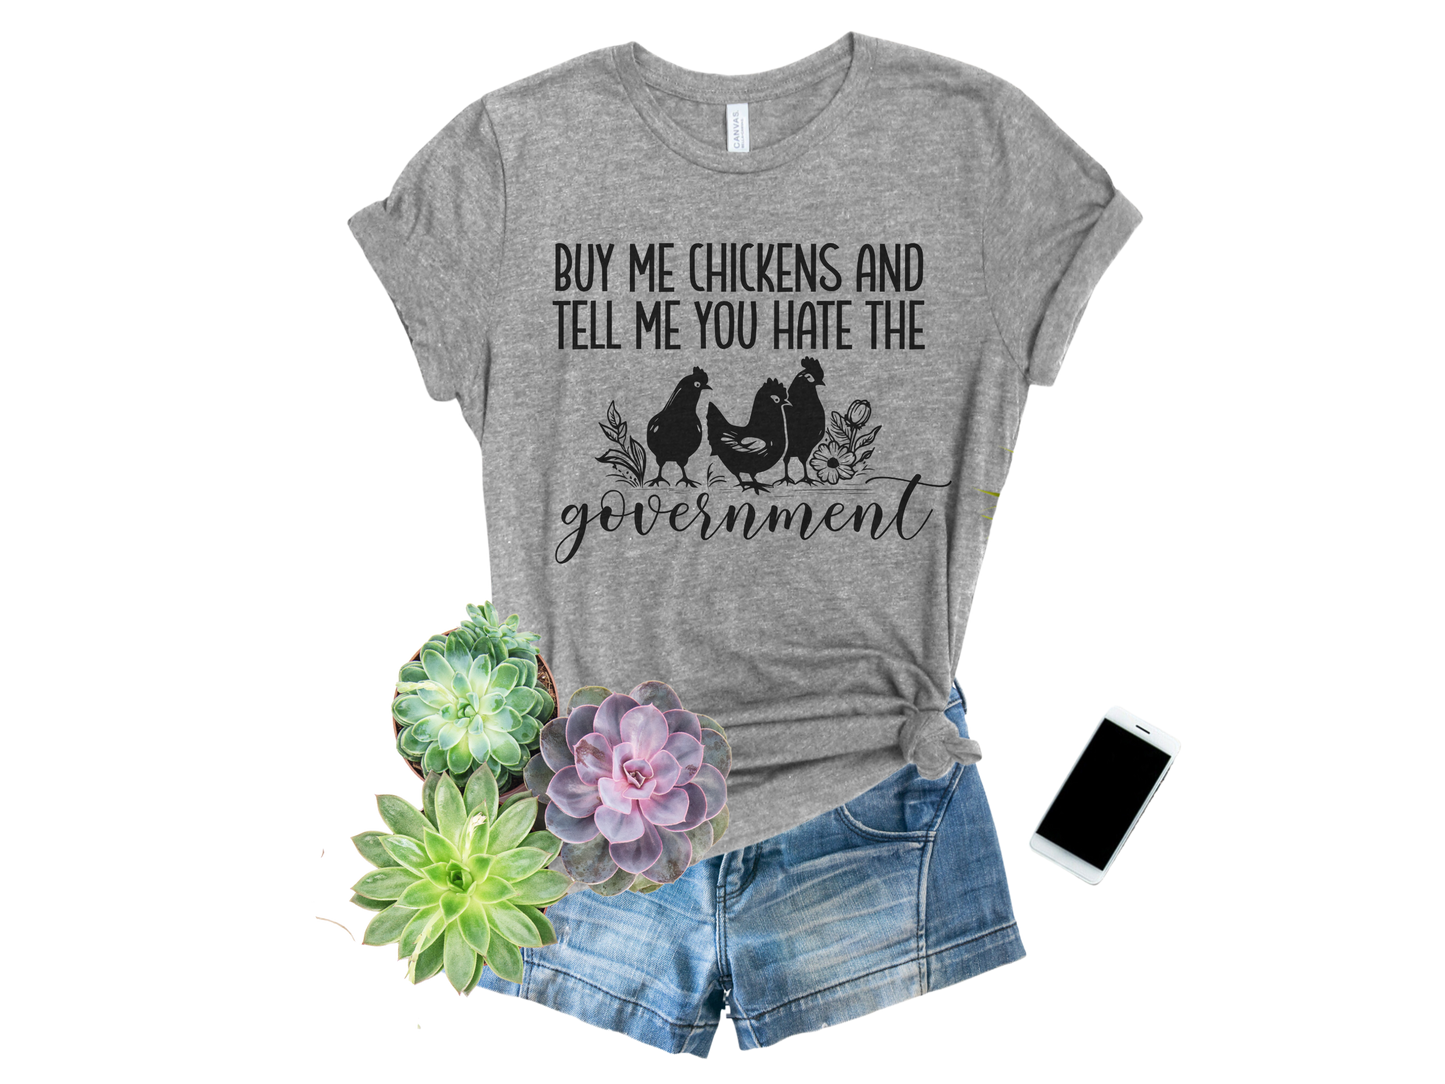 Buy Me Chickens and Tell Me You Hate The Government